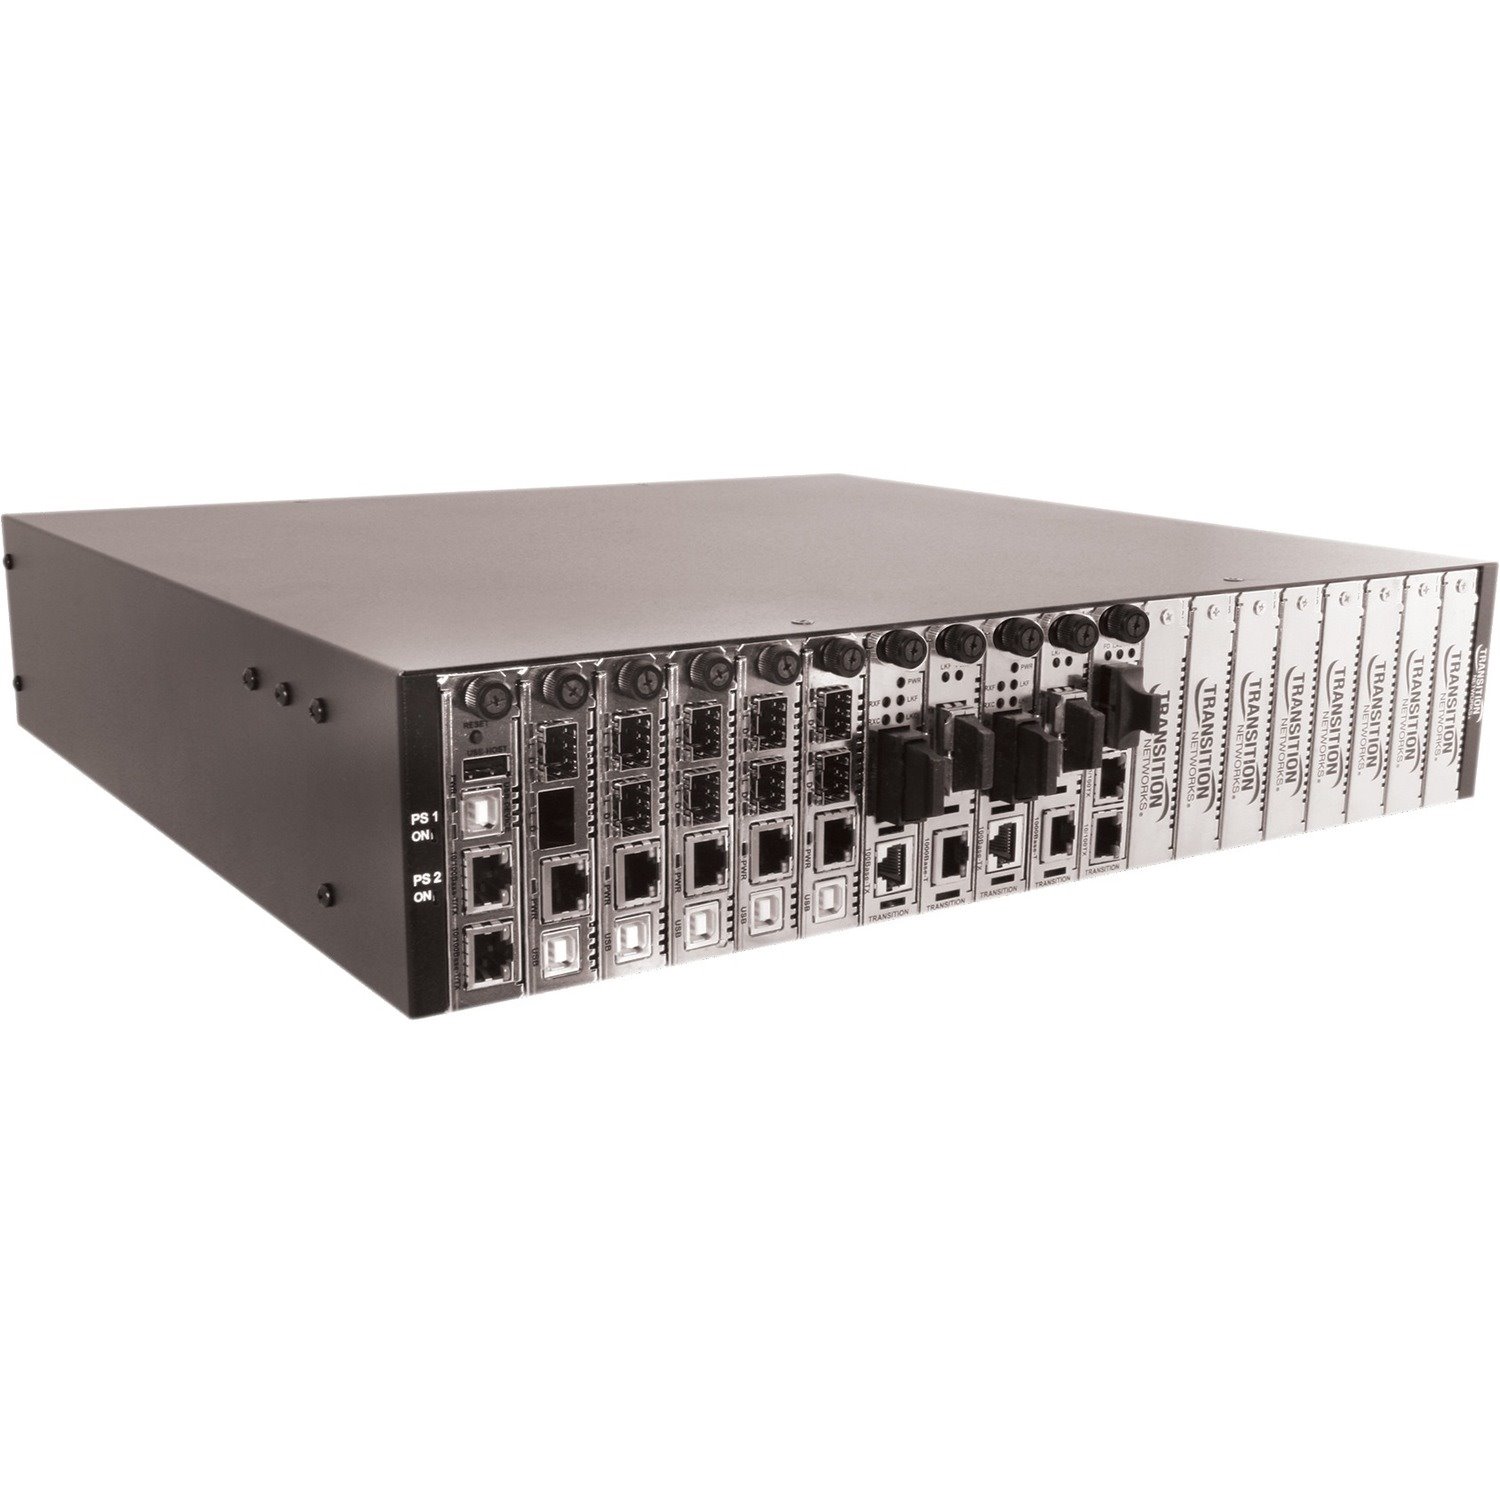 Transition Networks 19-Slot Chassis for the ION Platform DC Powered